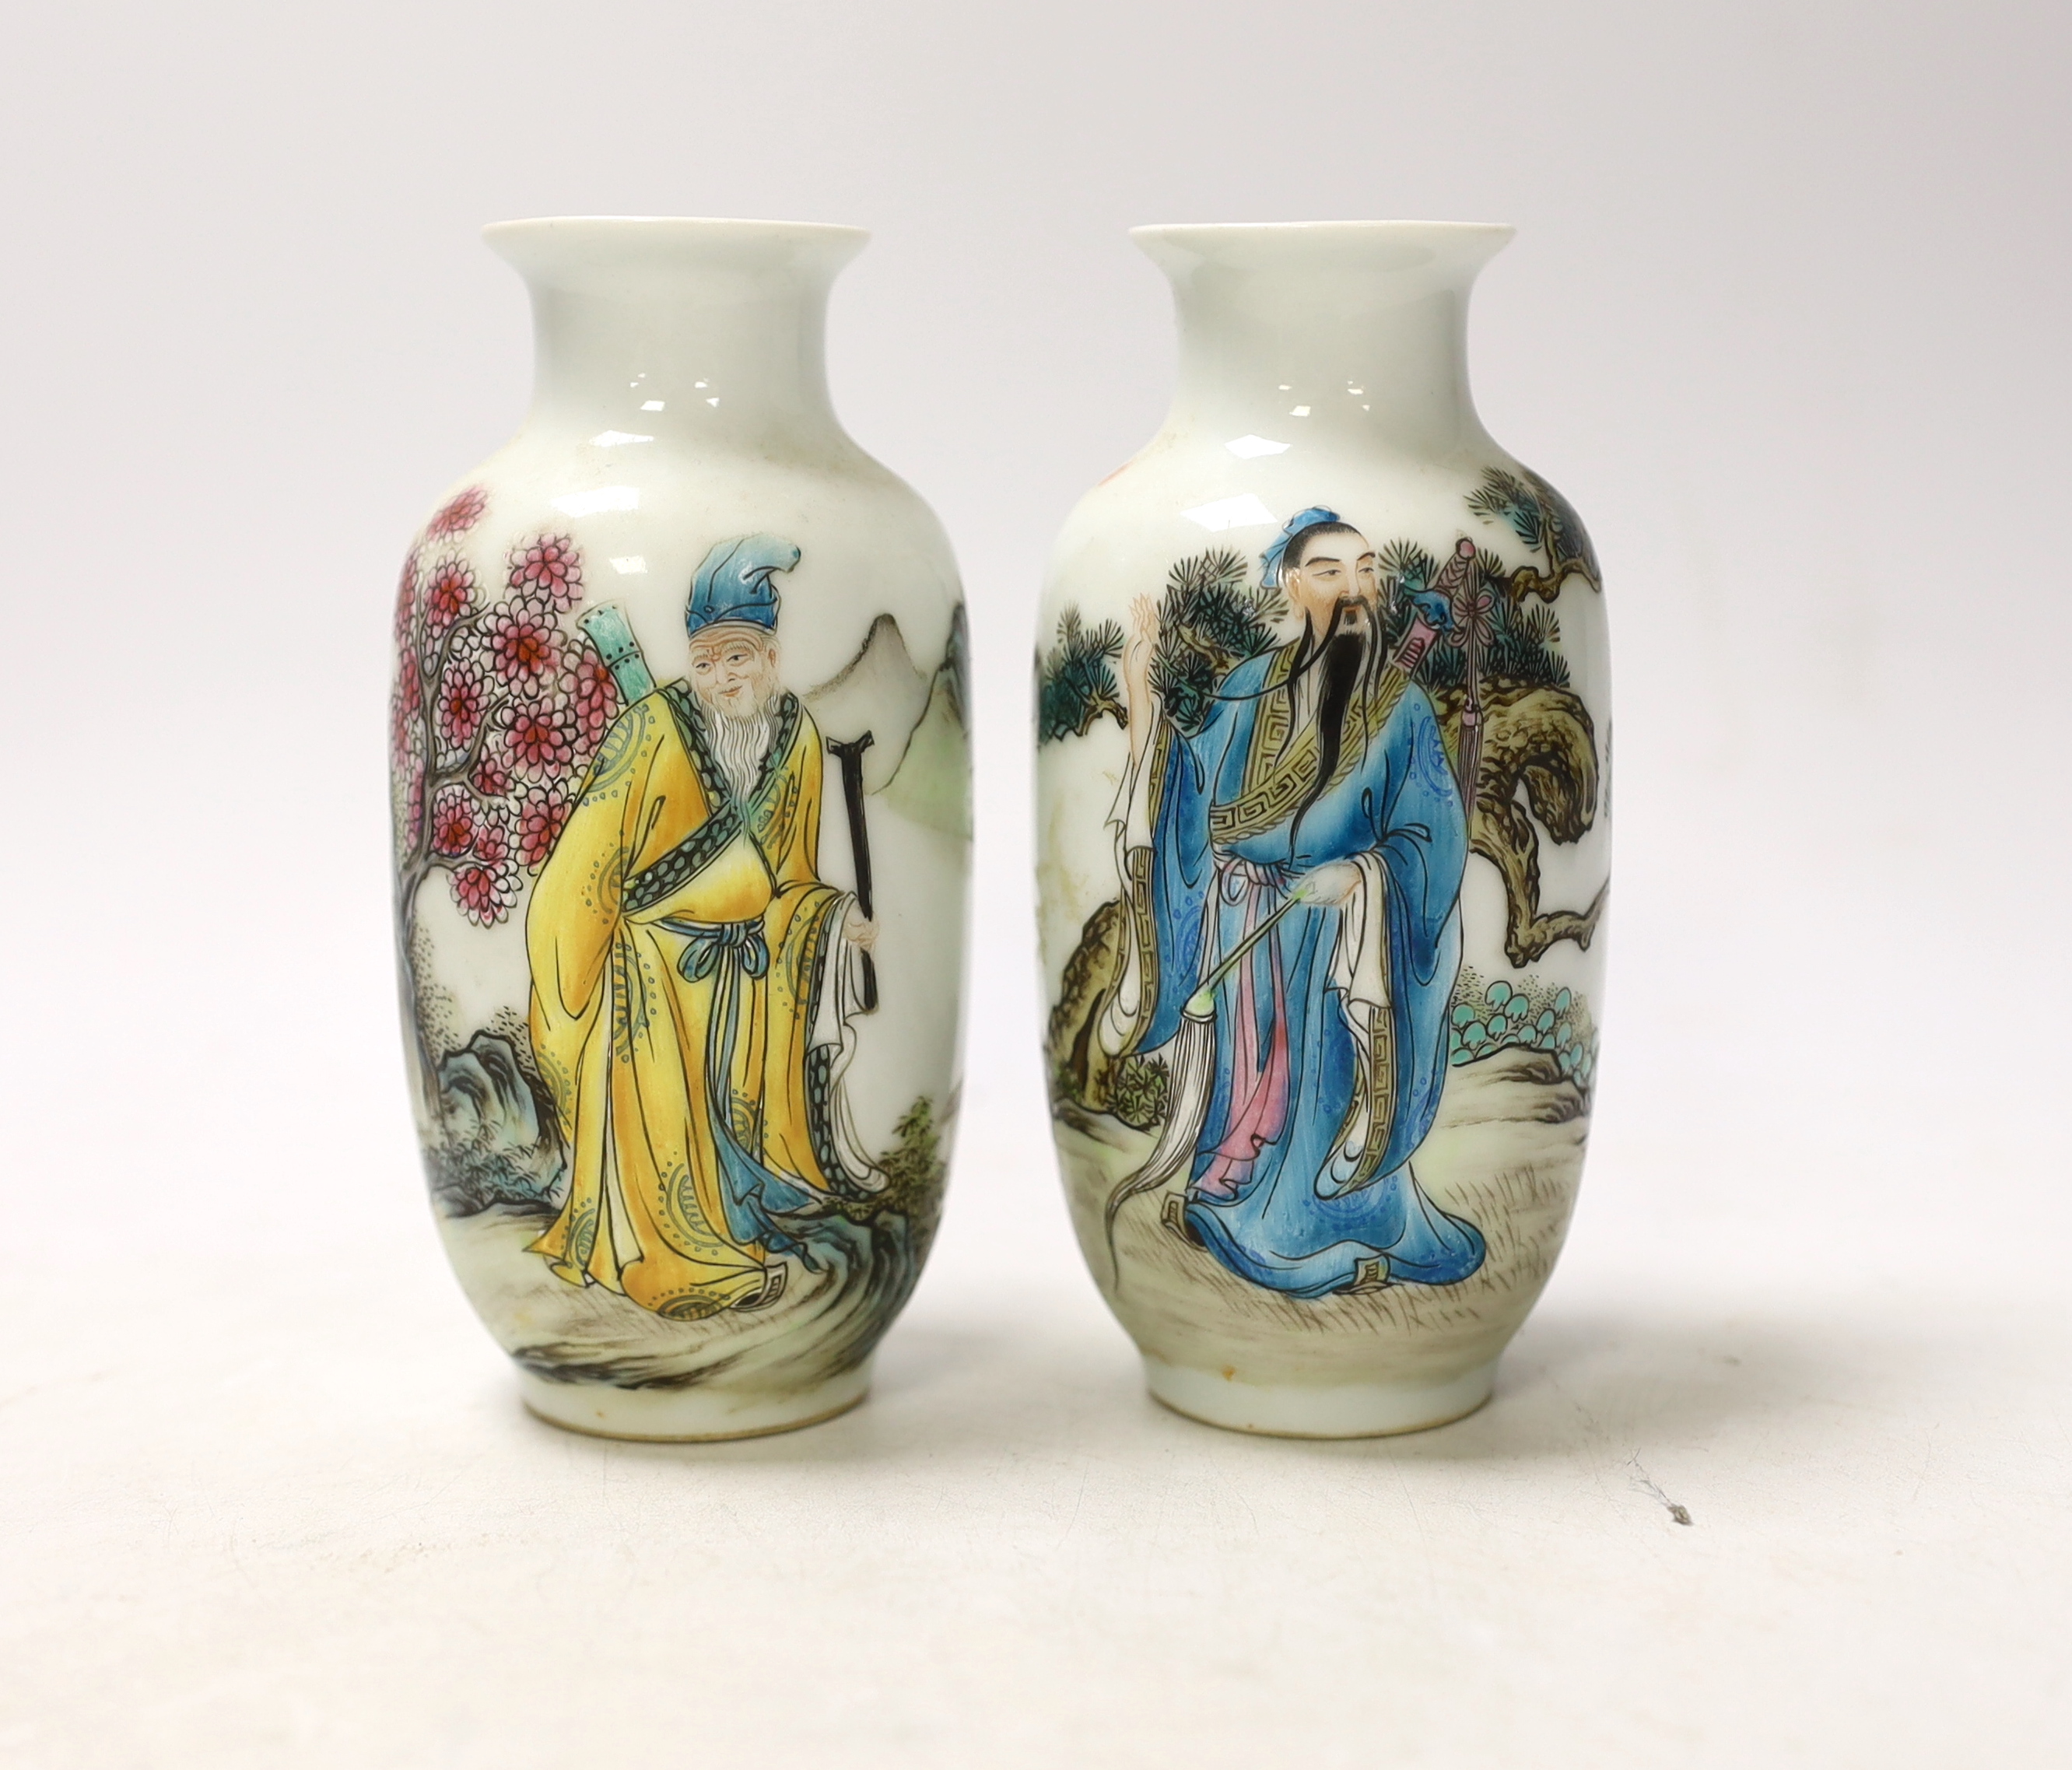 A pair of small Chinese famille verte vases, Qianlong marks but Republic period, depicting Lu